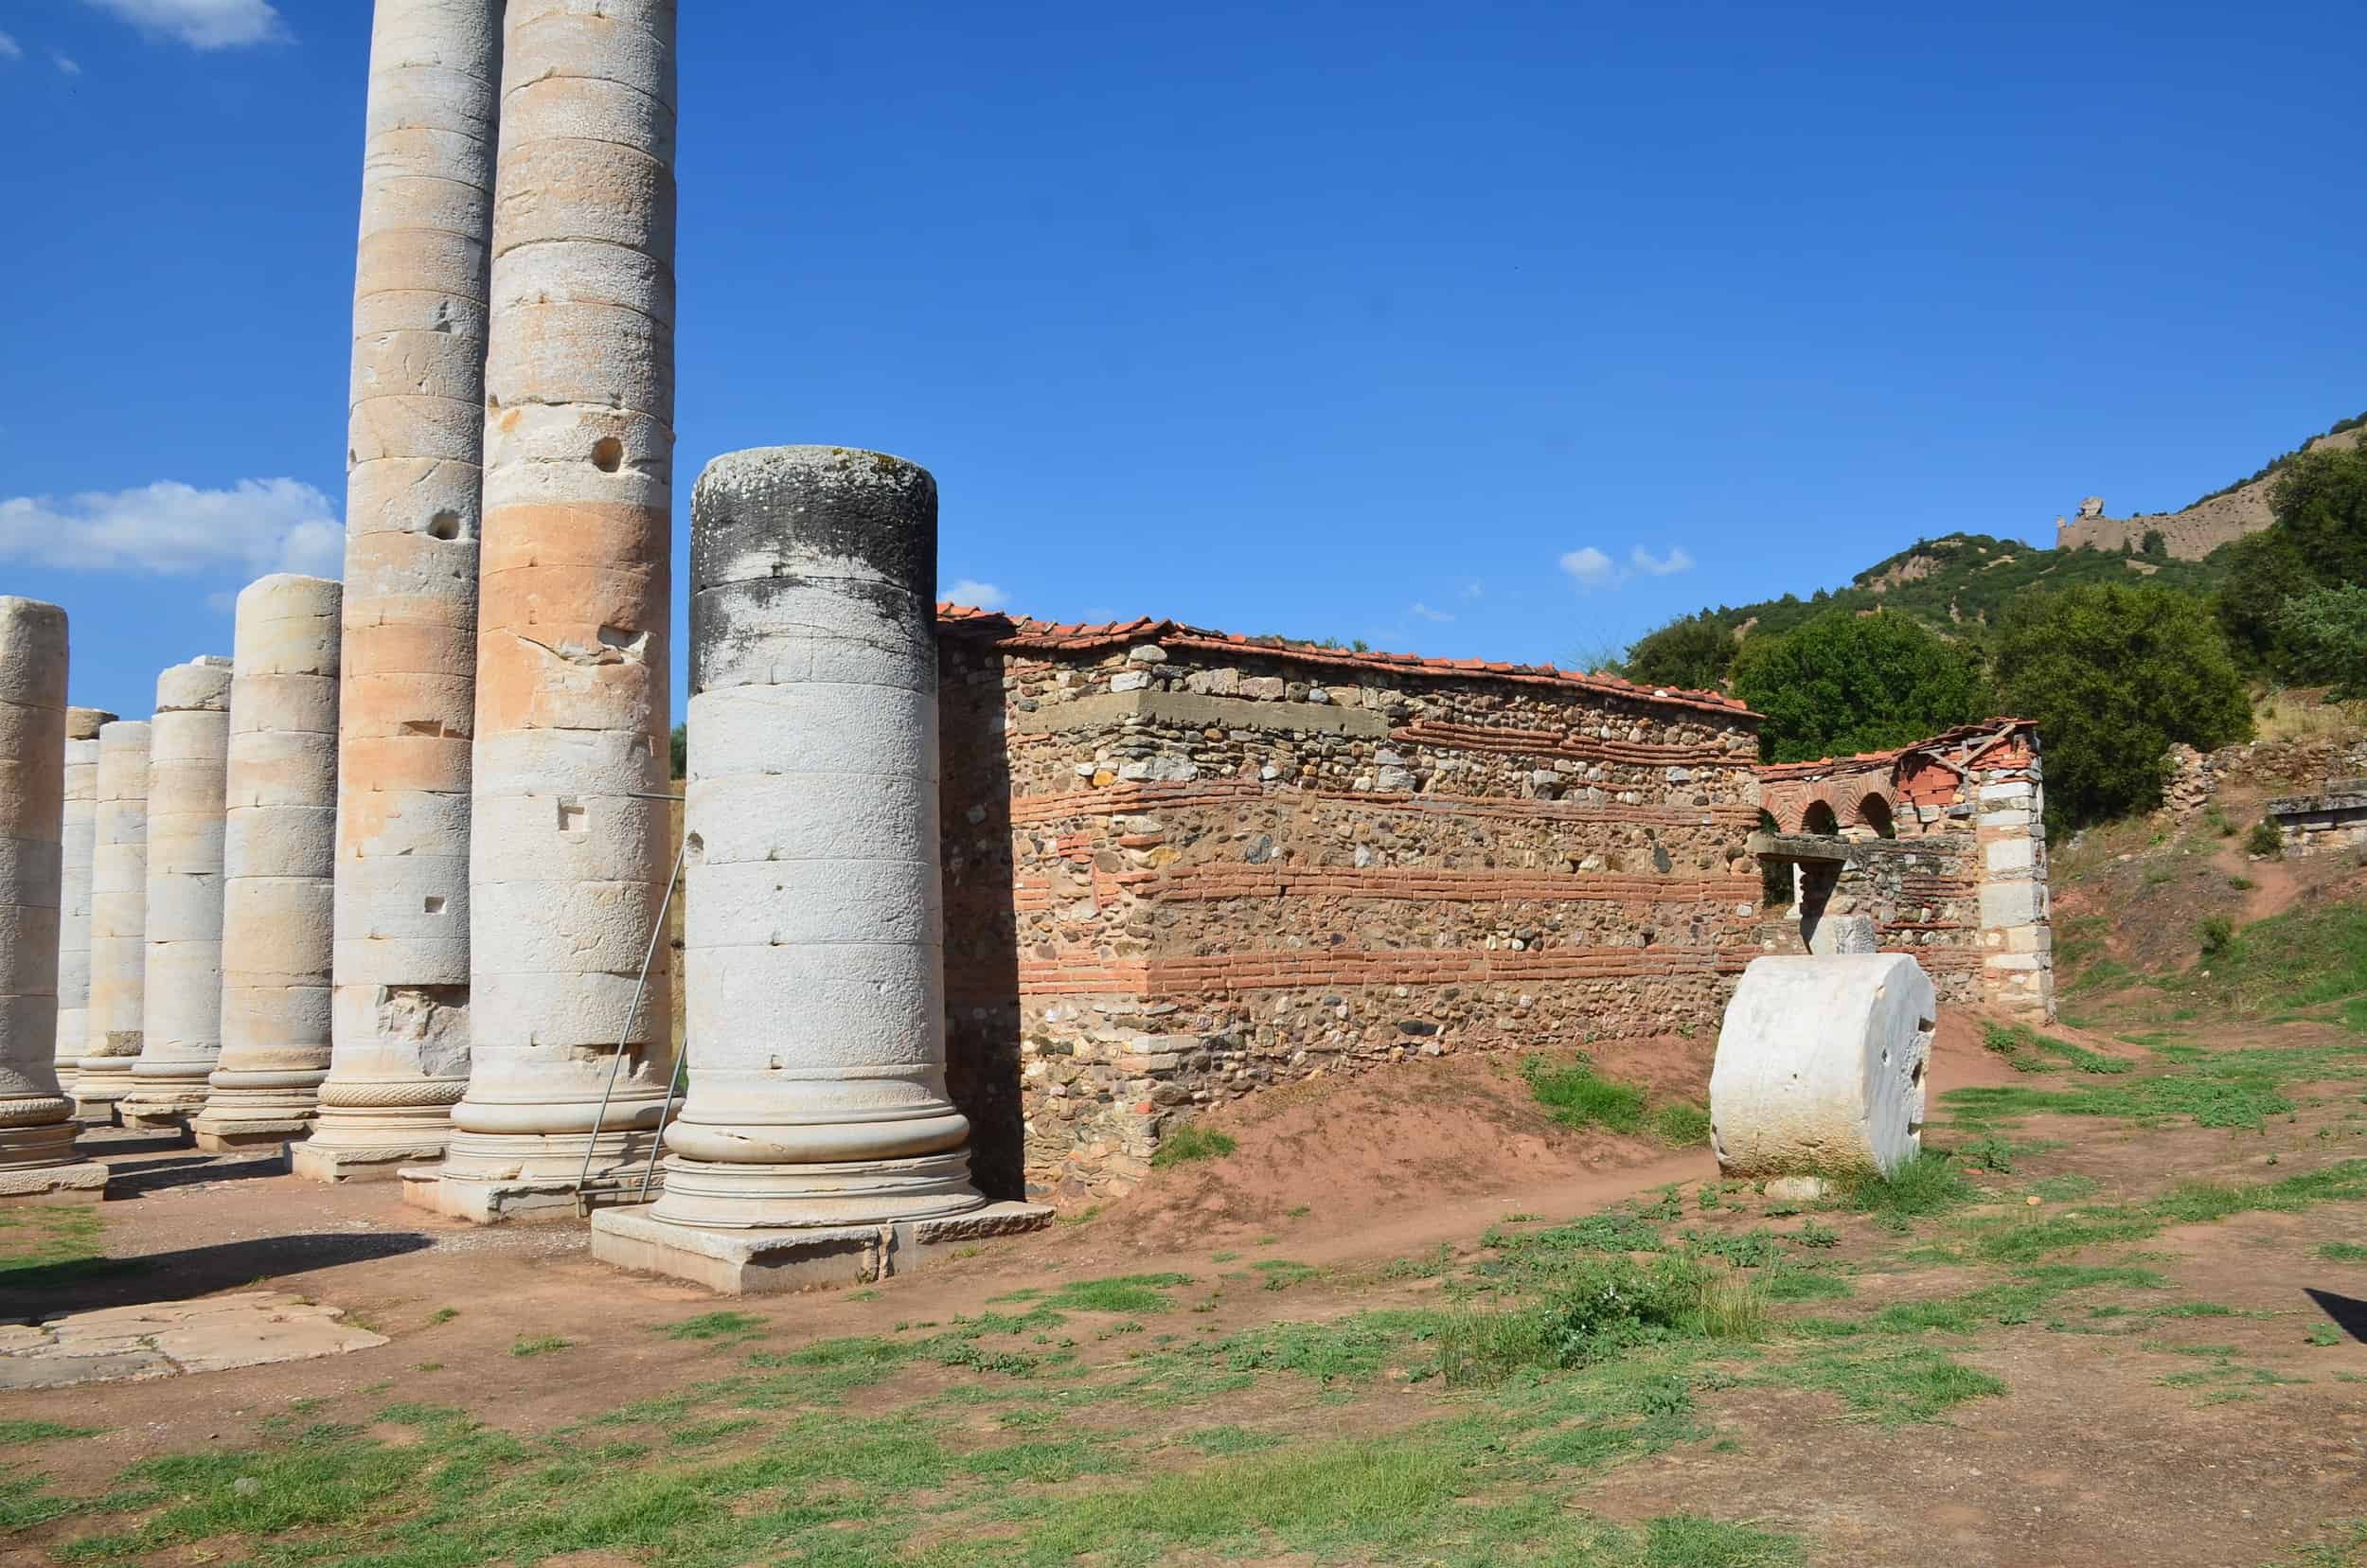 Byzantine church at the Temple of Artemis in Sardis